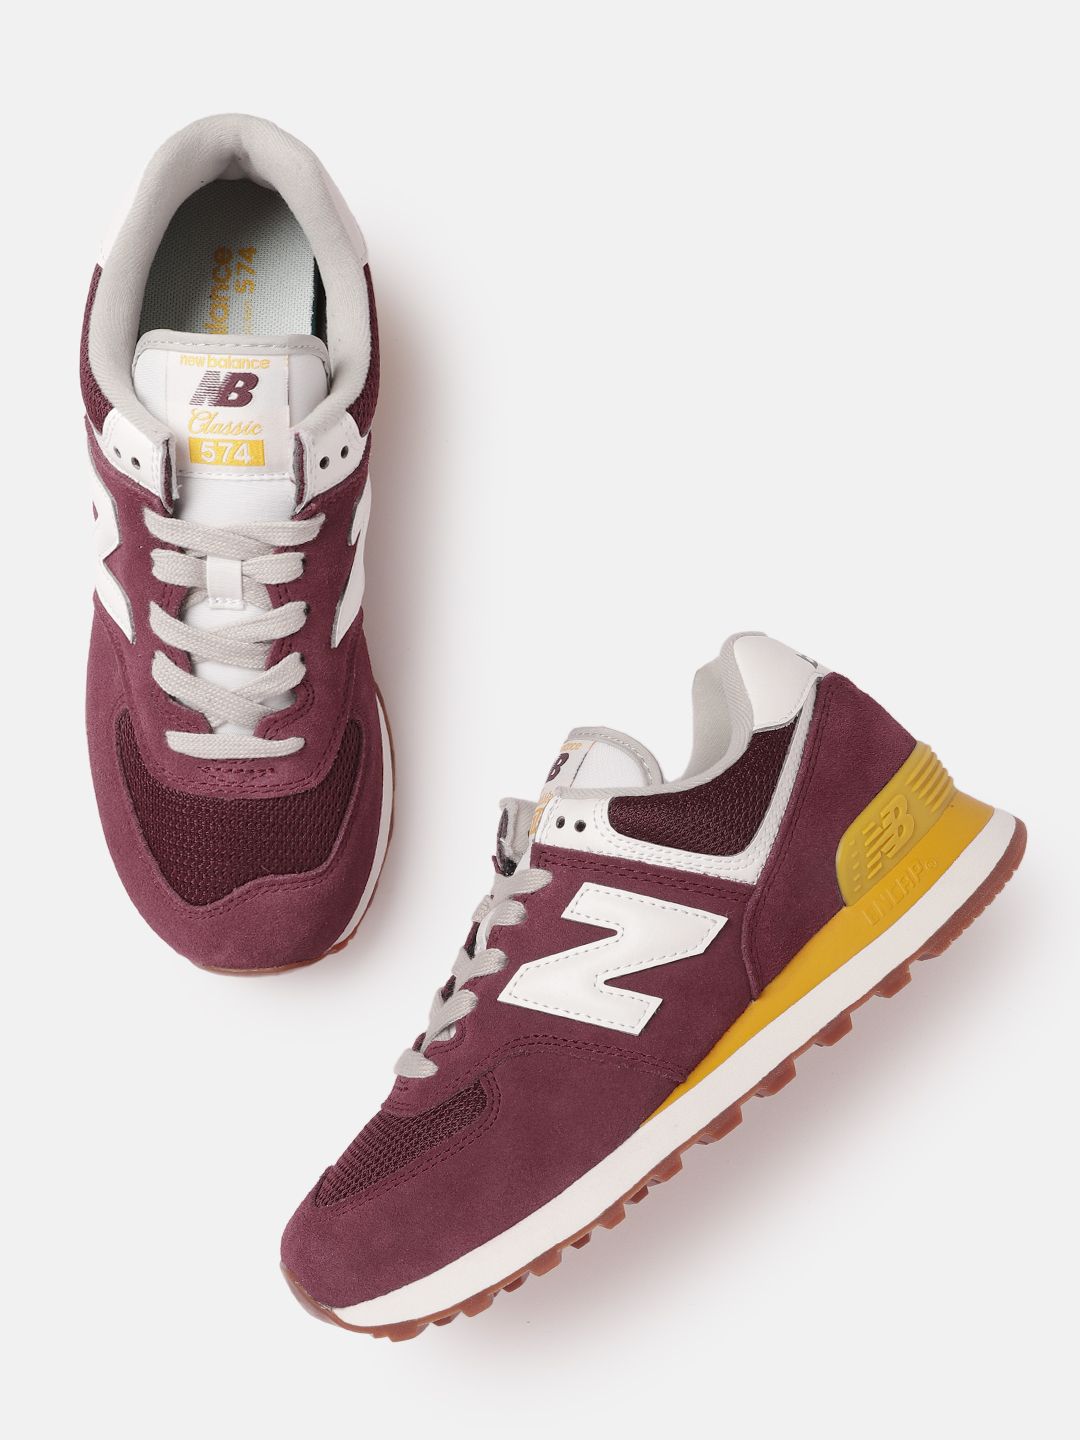 New Balance Women Maroon & White Solid 574 Sneakers Price in India